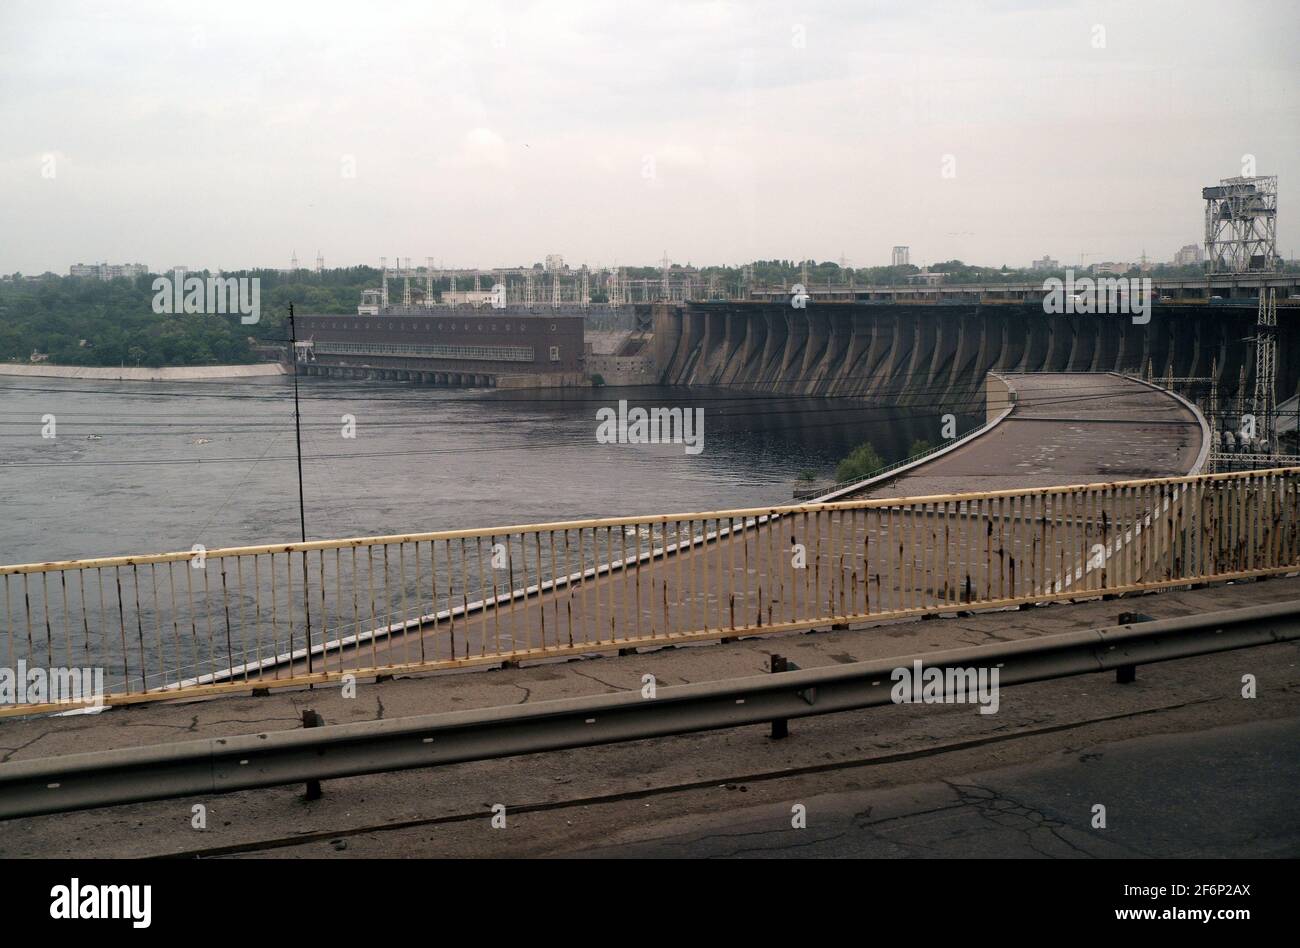 Downstream view of Dnieper Hydroelectric Station and dam, River Dnieper, Zaporozhye, Ukraine. Stock Photo